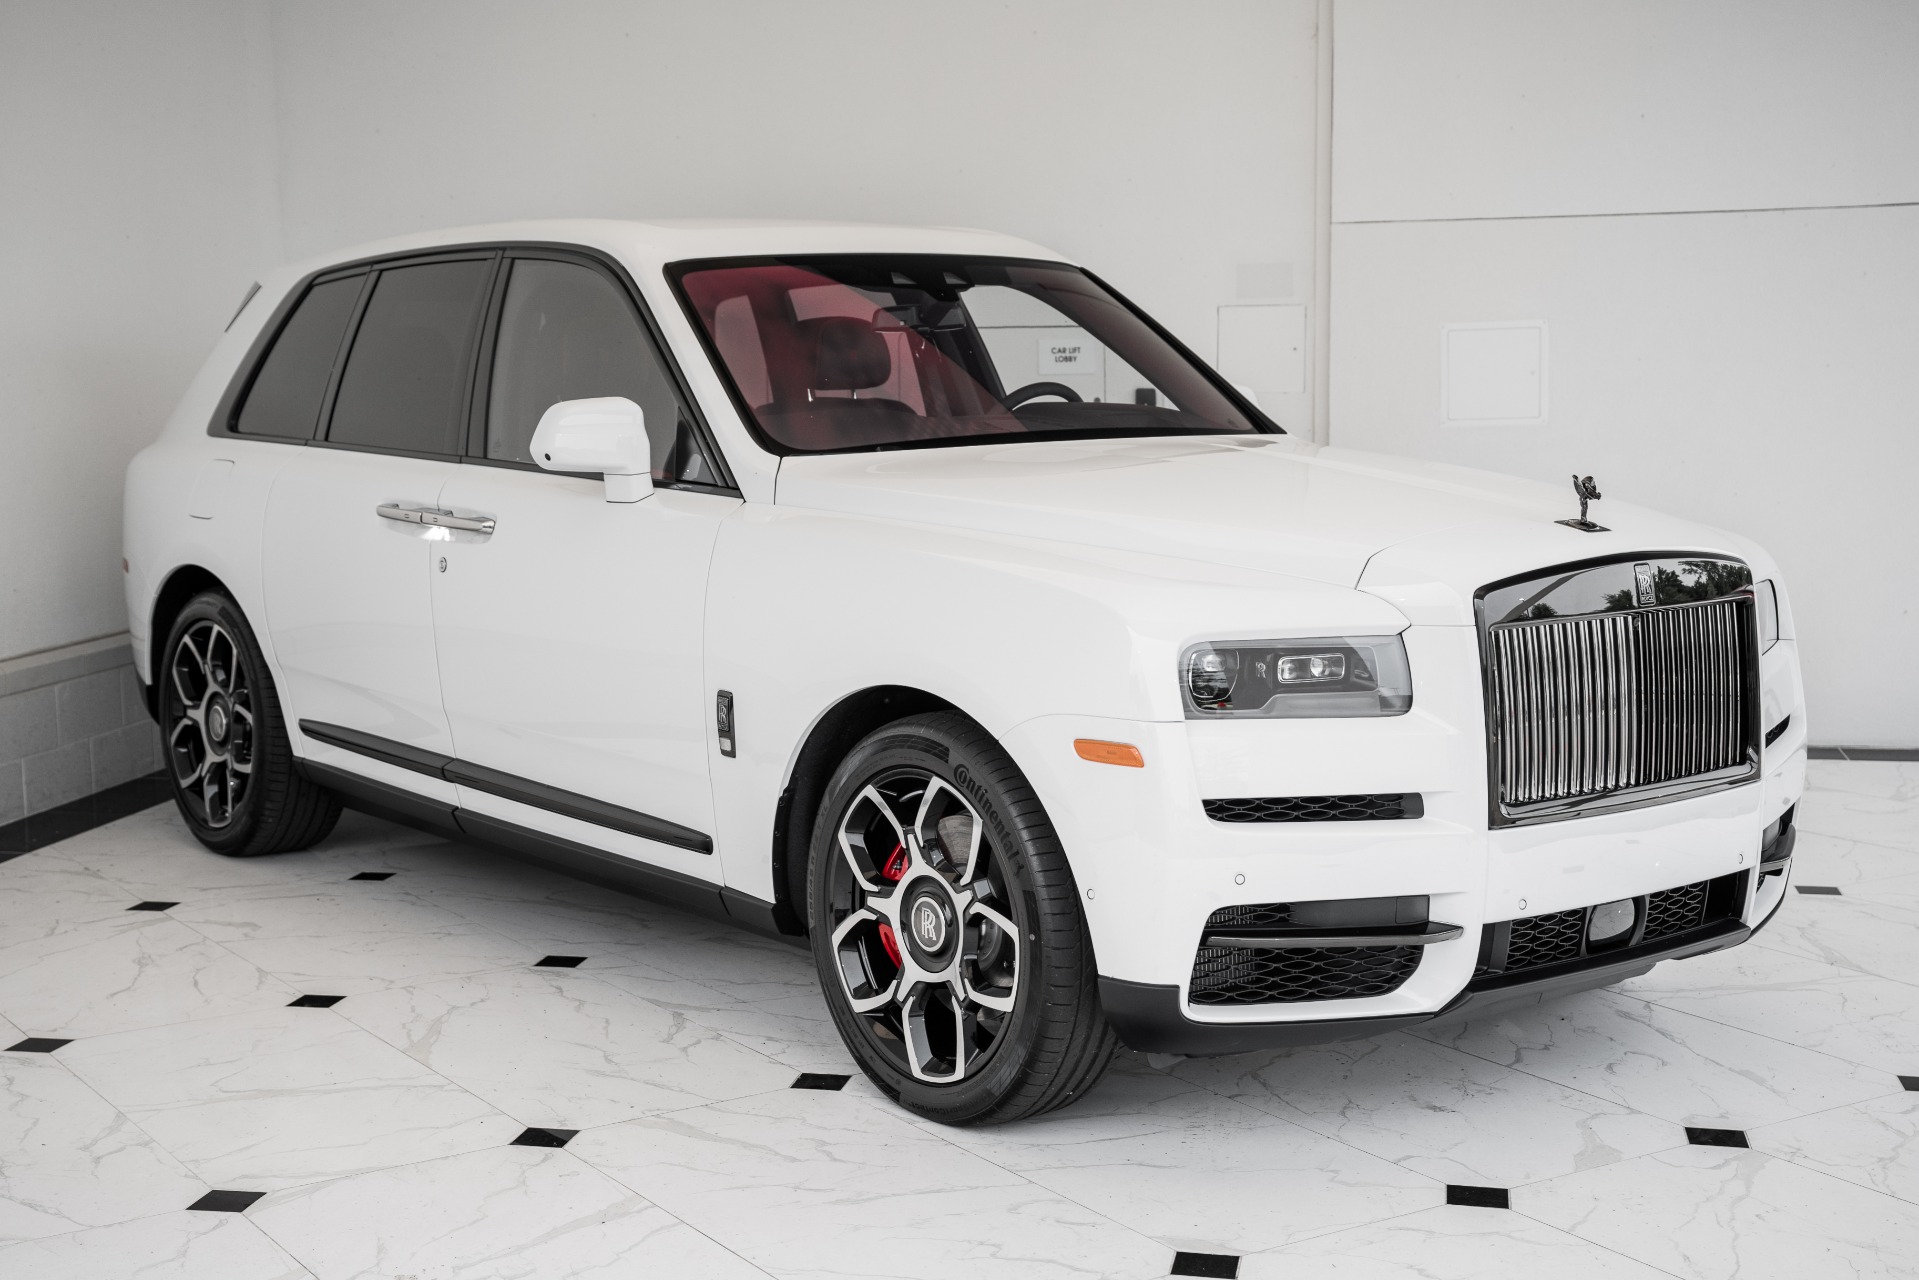 3 Rolls-Royce Cullinan Black Badge Owners & Their Exquisite Cars